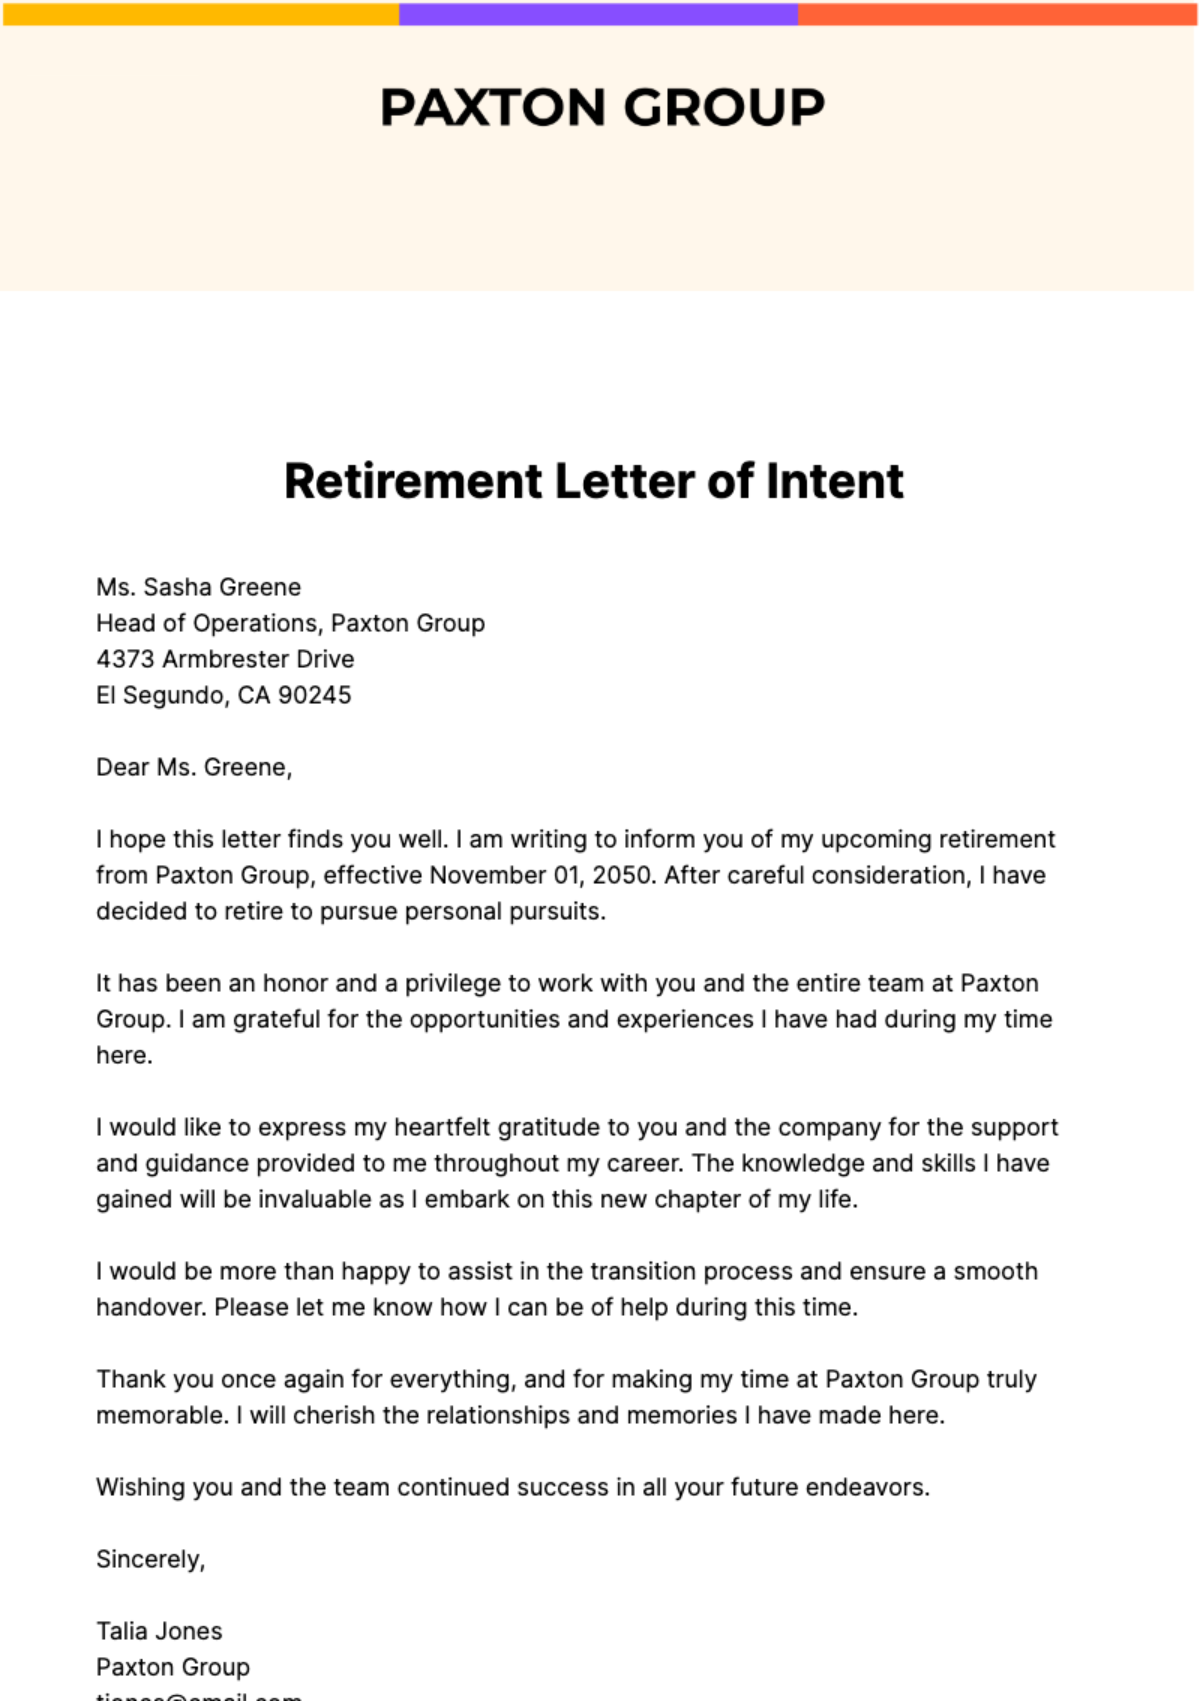 Free Retirement Letter of Intent Template